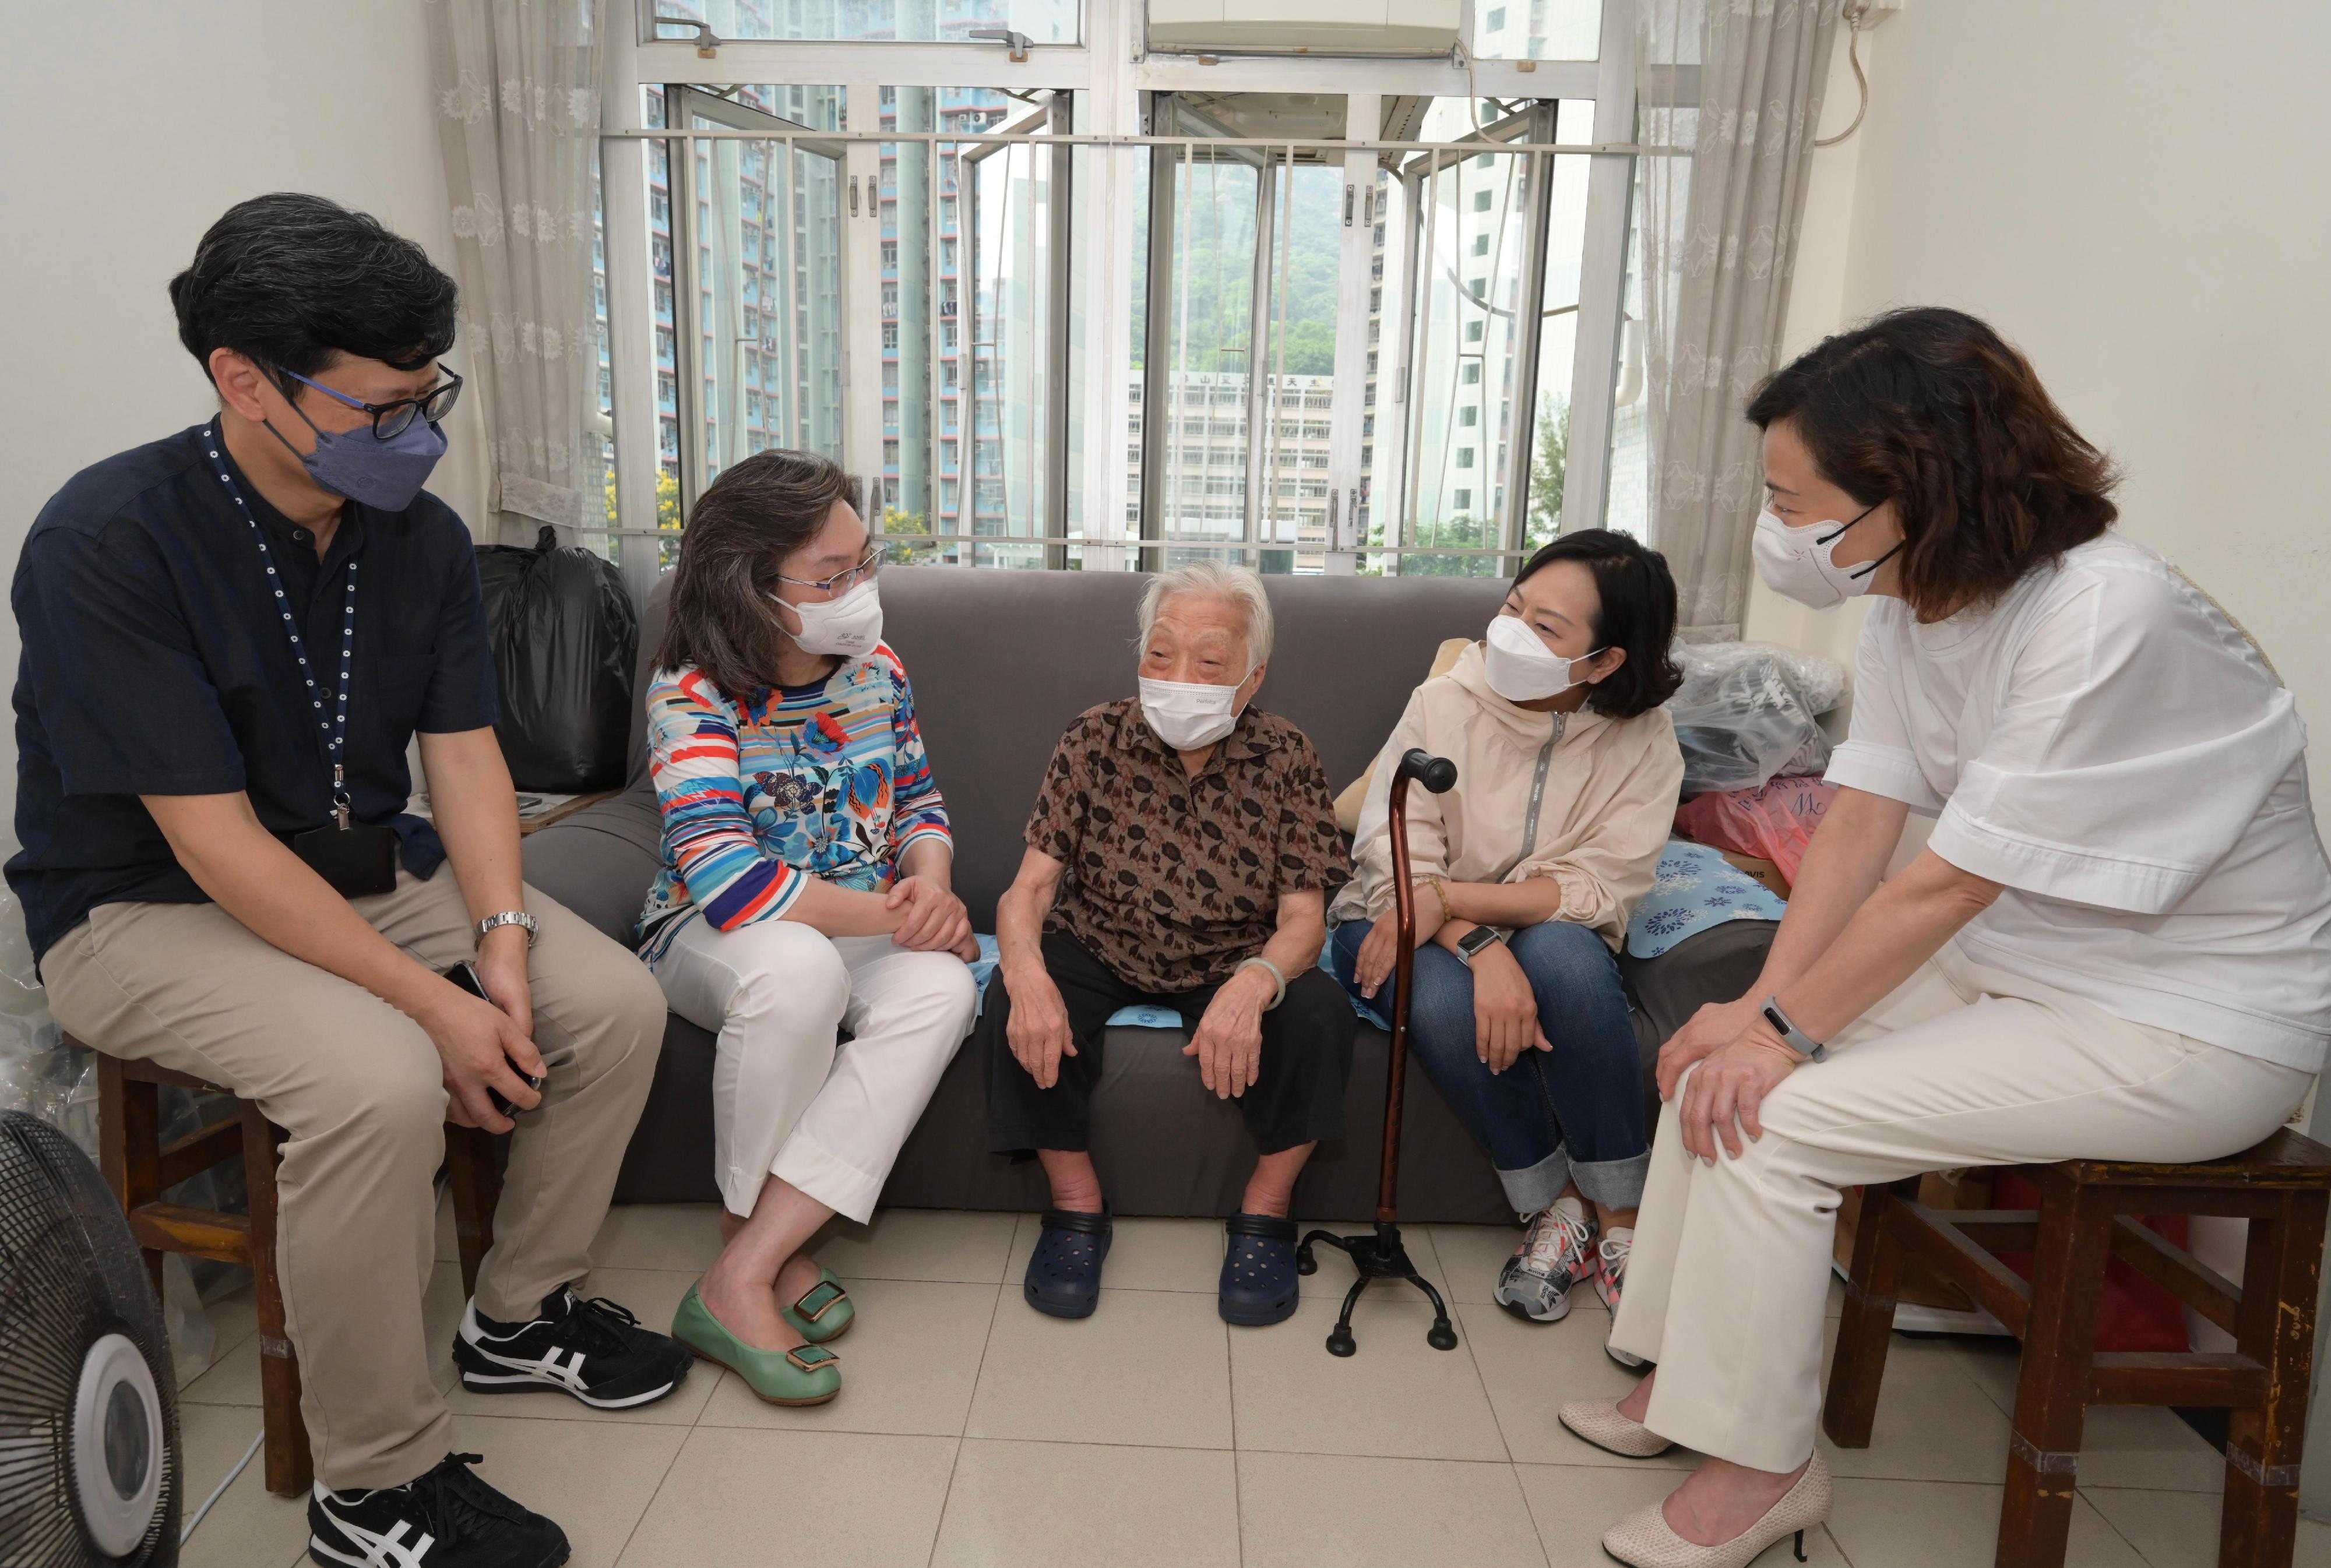 To further encourage elderly persons to receive COVID-19 vaccination for self-protection, various government departments worked with a district group and the property management sector to roll out at Tsz Hong and Tsz Man Estates in Wong Tai Sin a pilot scheme to visit elderly persons in order to encourage them to receive COVID-19 vaccination. For two consecutive days starting from today (September 17), they will pay door-to-door visits to households with elderly persons aged 70 or above at the two estates. Photo shows the Secretary for the Civil Service, Mrs Ingrid Yeung (second left), and the Secretary for Home and Youth Affairs, Miss Alice Mak (second right), visiting an 89-year-old elderly (centre) living in Tsz Man Estate to encourage her to receive COVID-19 vaccination. Looking on are the Director of Home Affairs, Mrs Alice Cheung (first right), and the Deputy Director of Housing (Estate Management), Mr Ricky Yeung (first left).